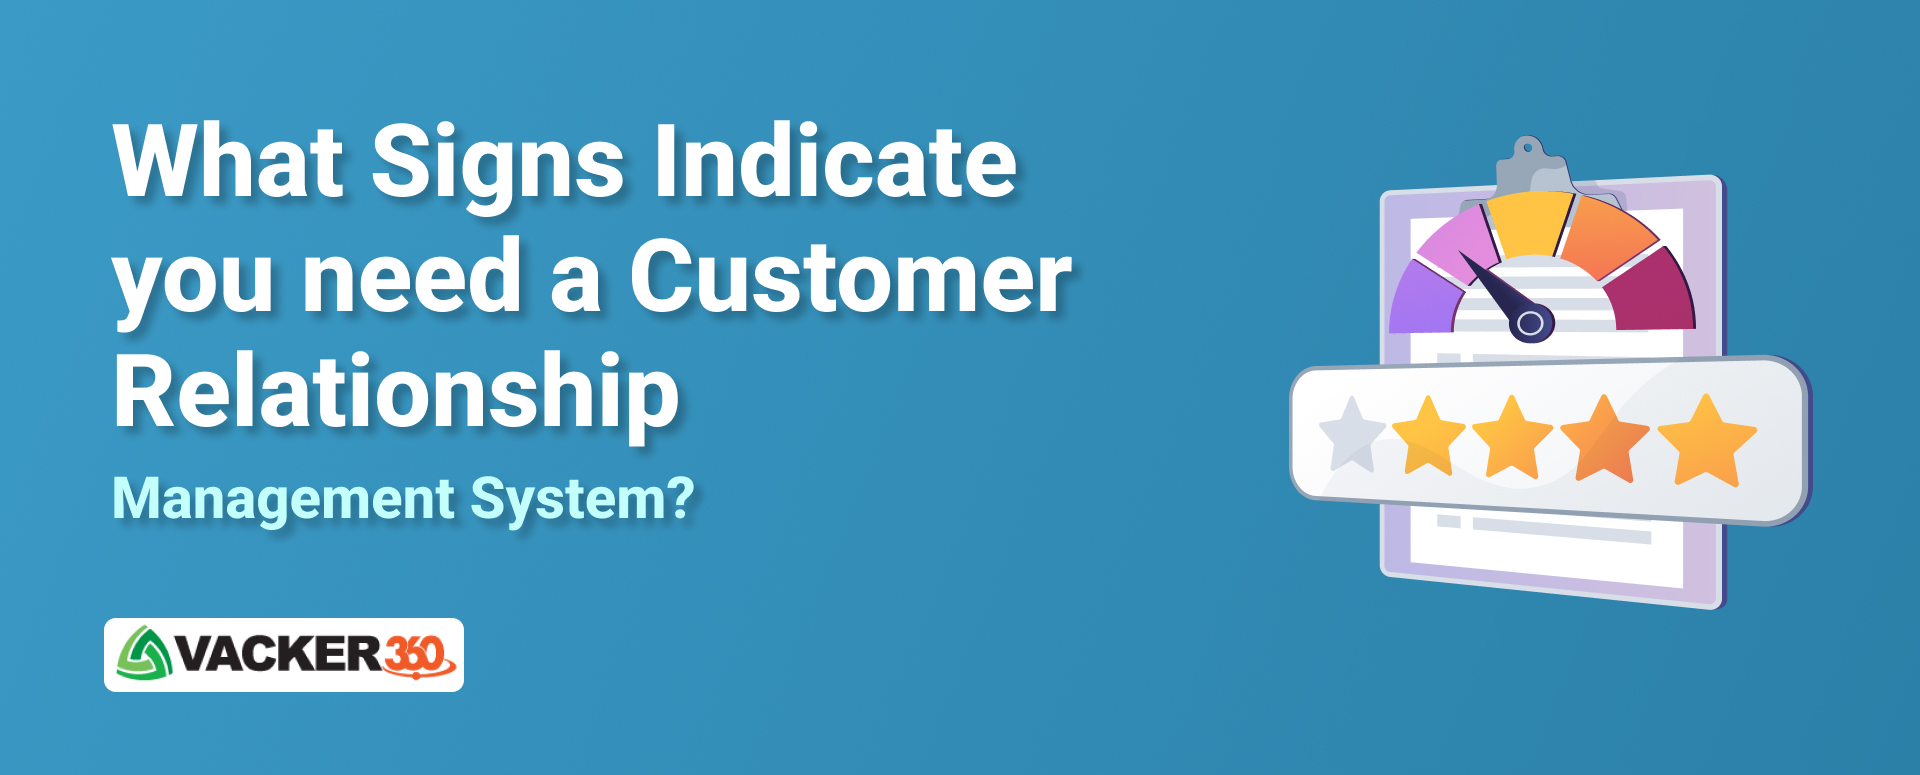 WHAT-SIGNS-INDICATE-YOU-NEED-A-CUSTOMER-RELATIONSHIP-MANAGEMENT-SYSTEM